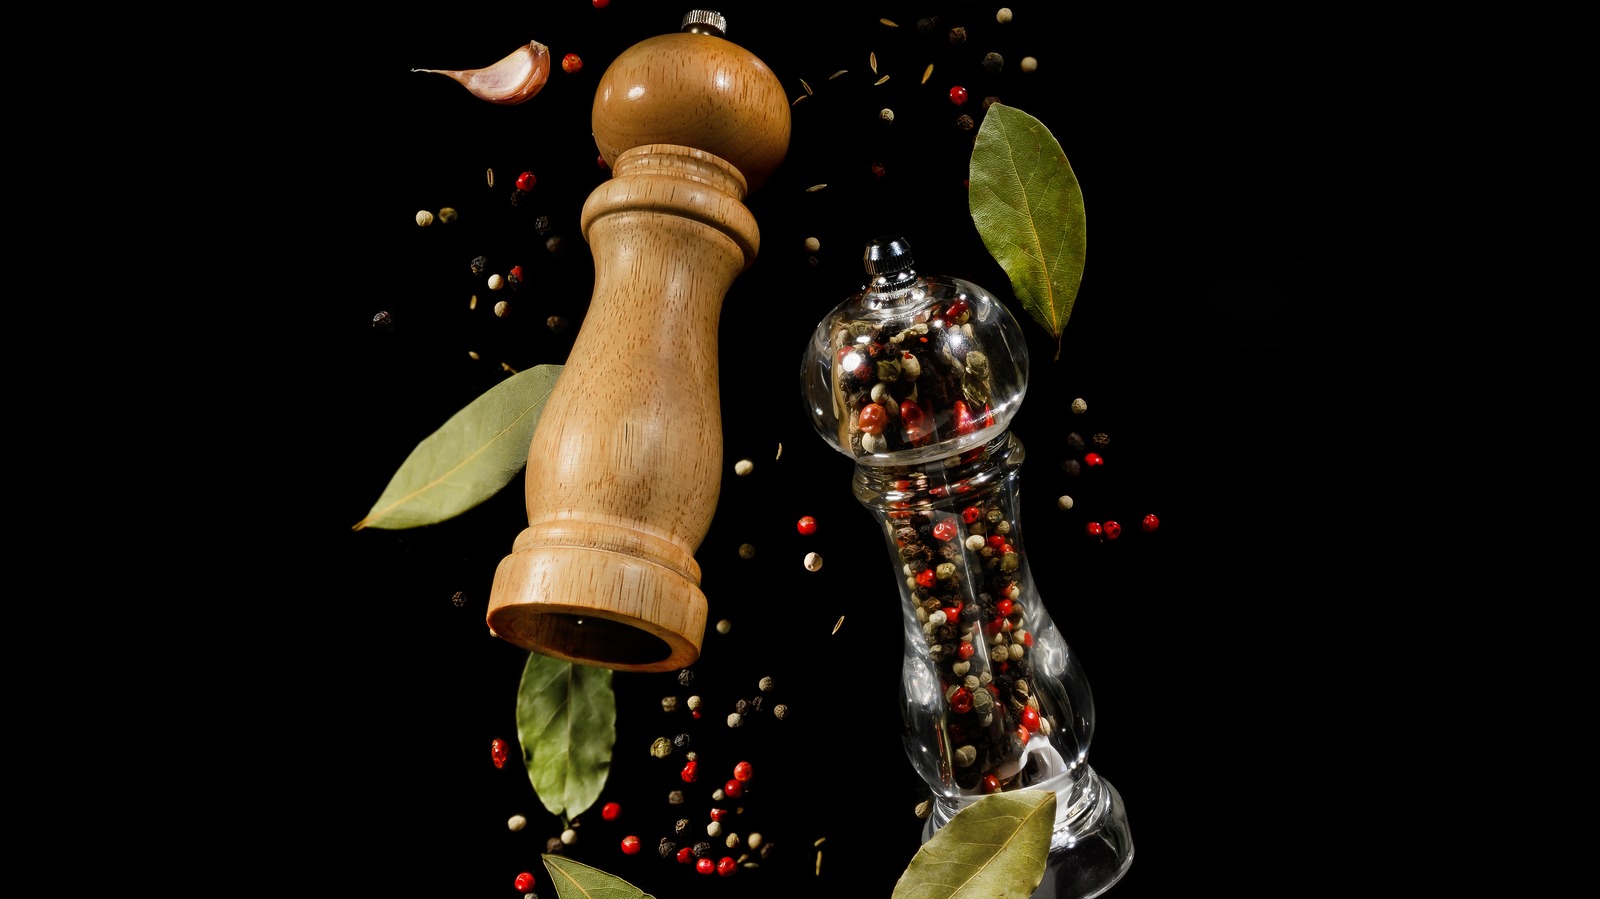 https://www.thedailymeal.com/img/gallery/the-fresh-pepper-grating-hack-that-will-making-measuring-your-spices-a-breeze/l-intro-1670342751.jpg